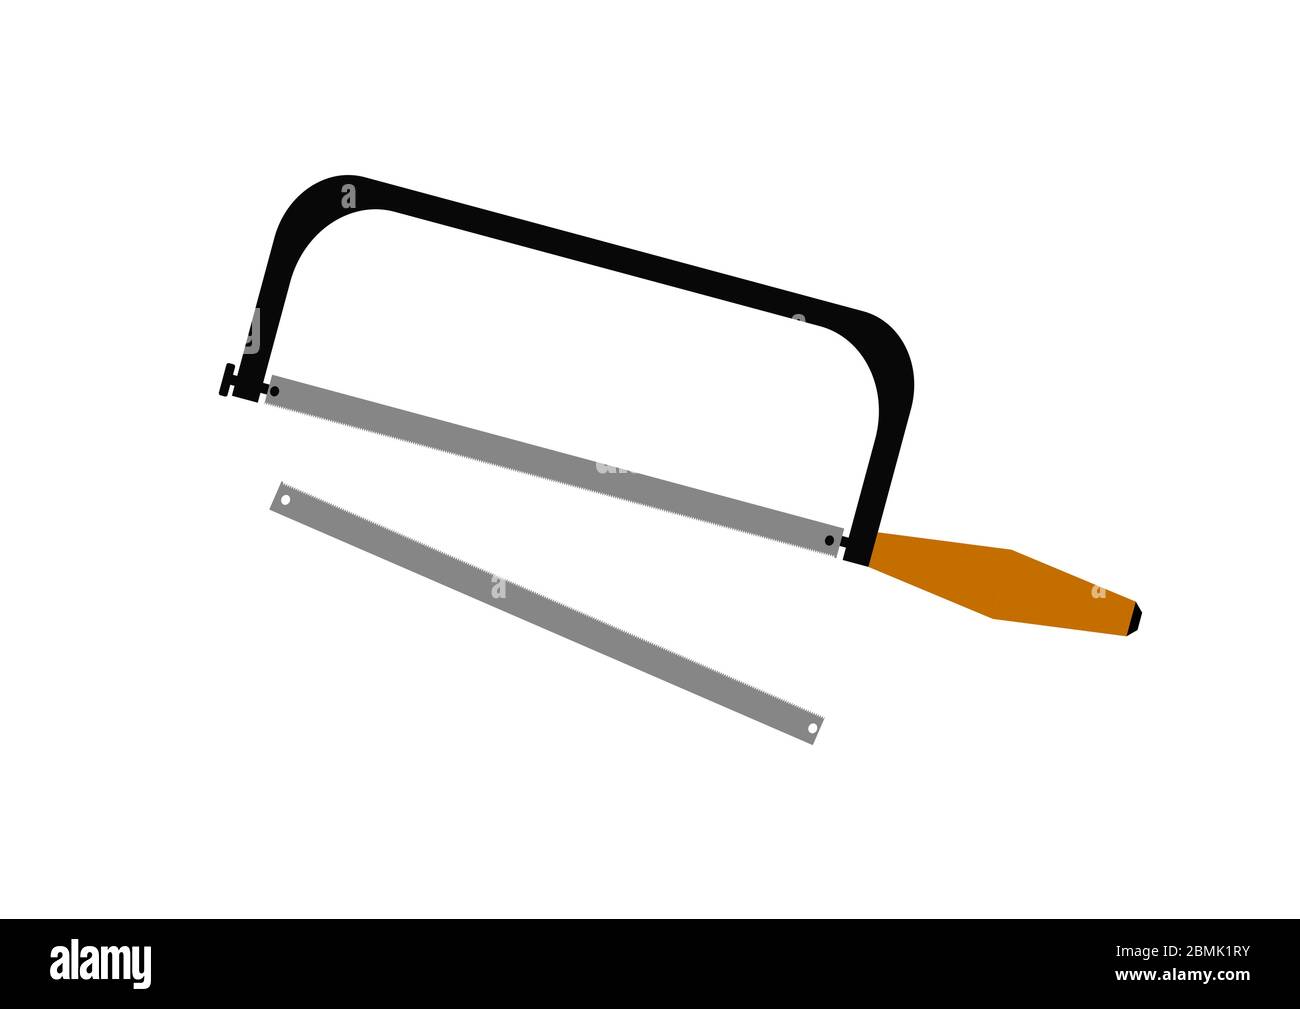 Hacksaw for metal locksmith tool on a white background. Stock Vector